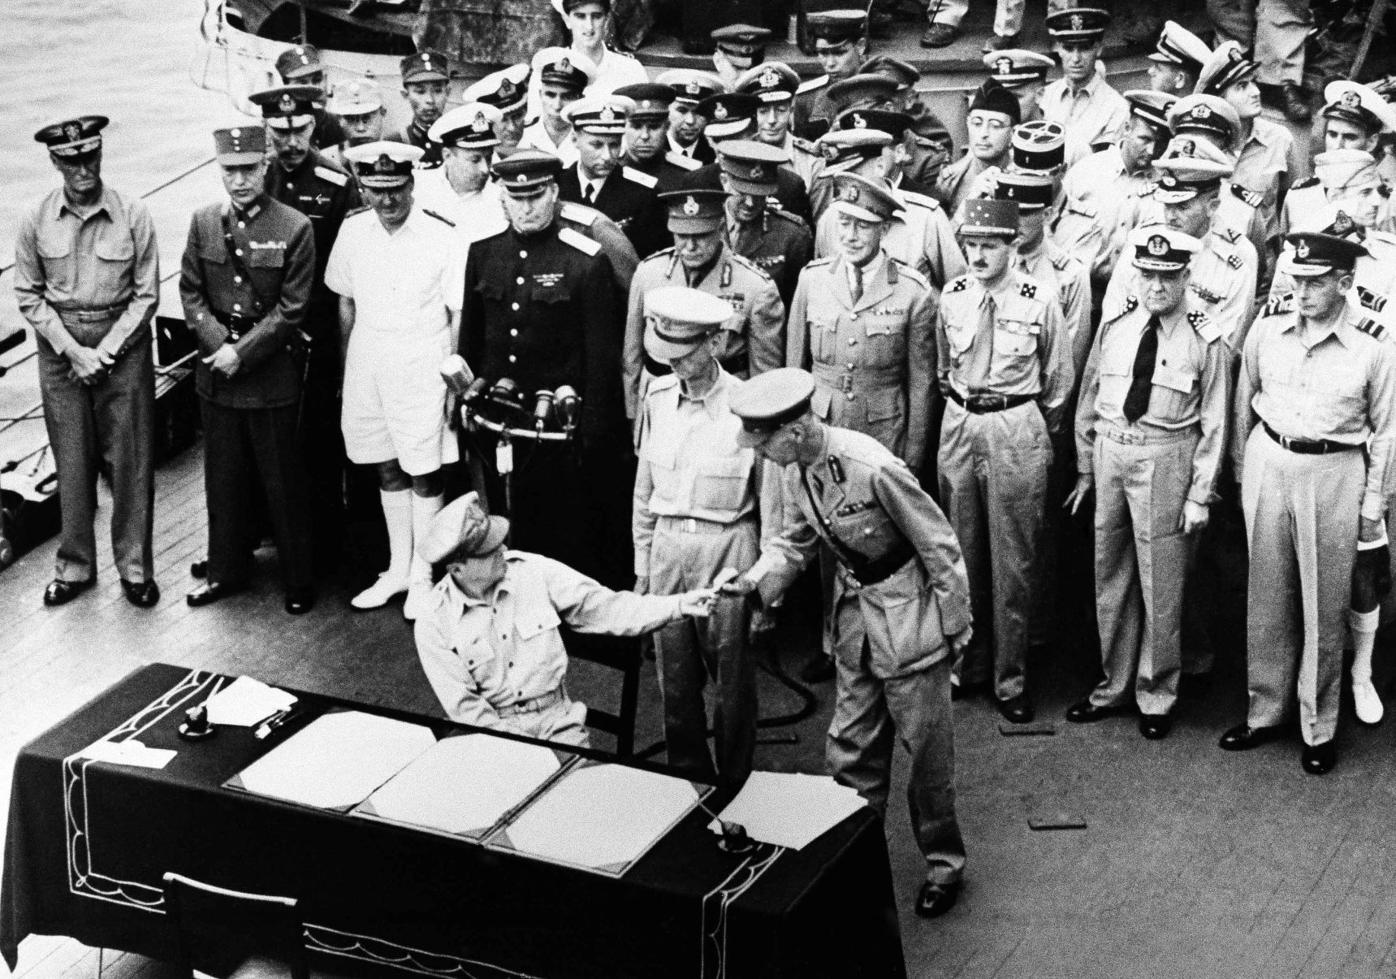 Historical photos of the Empire of Japan's 1945 unconditional surrender ...